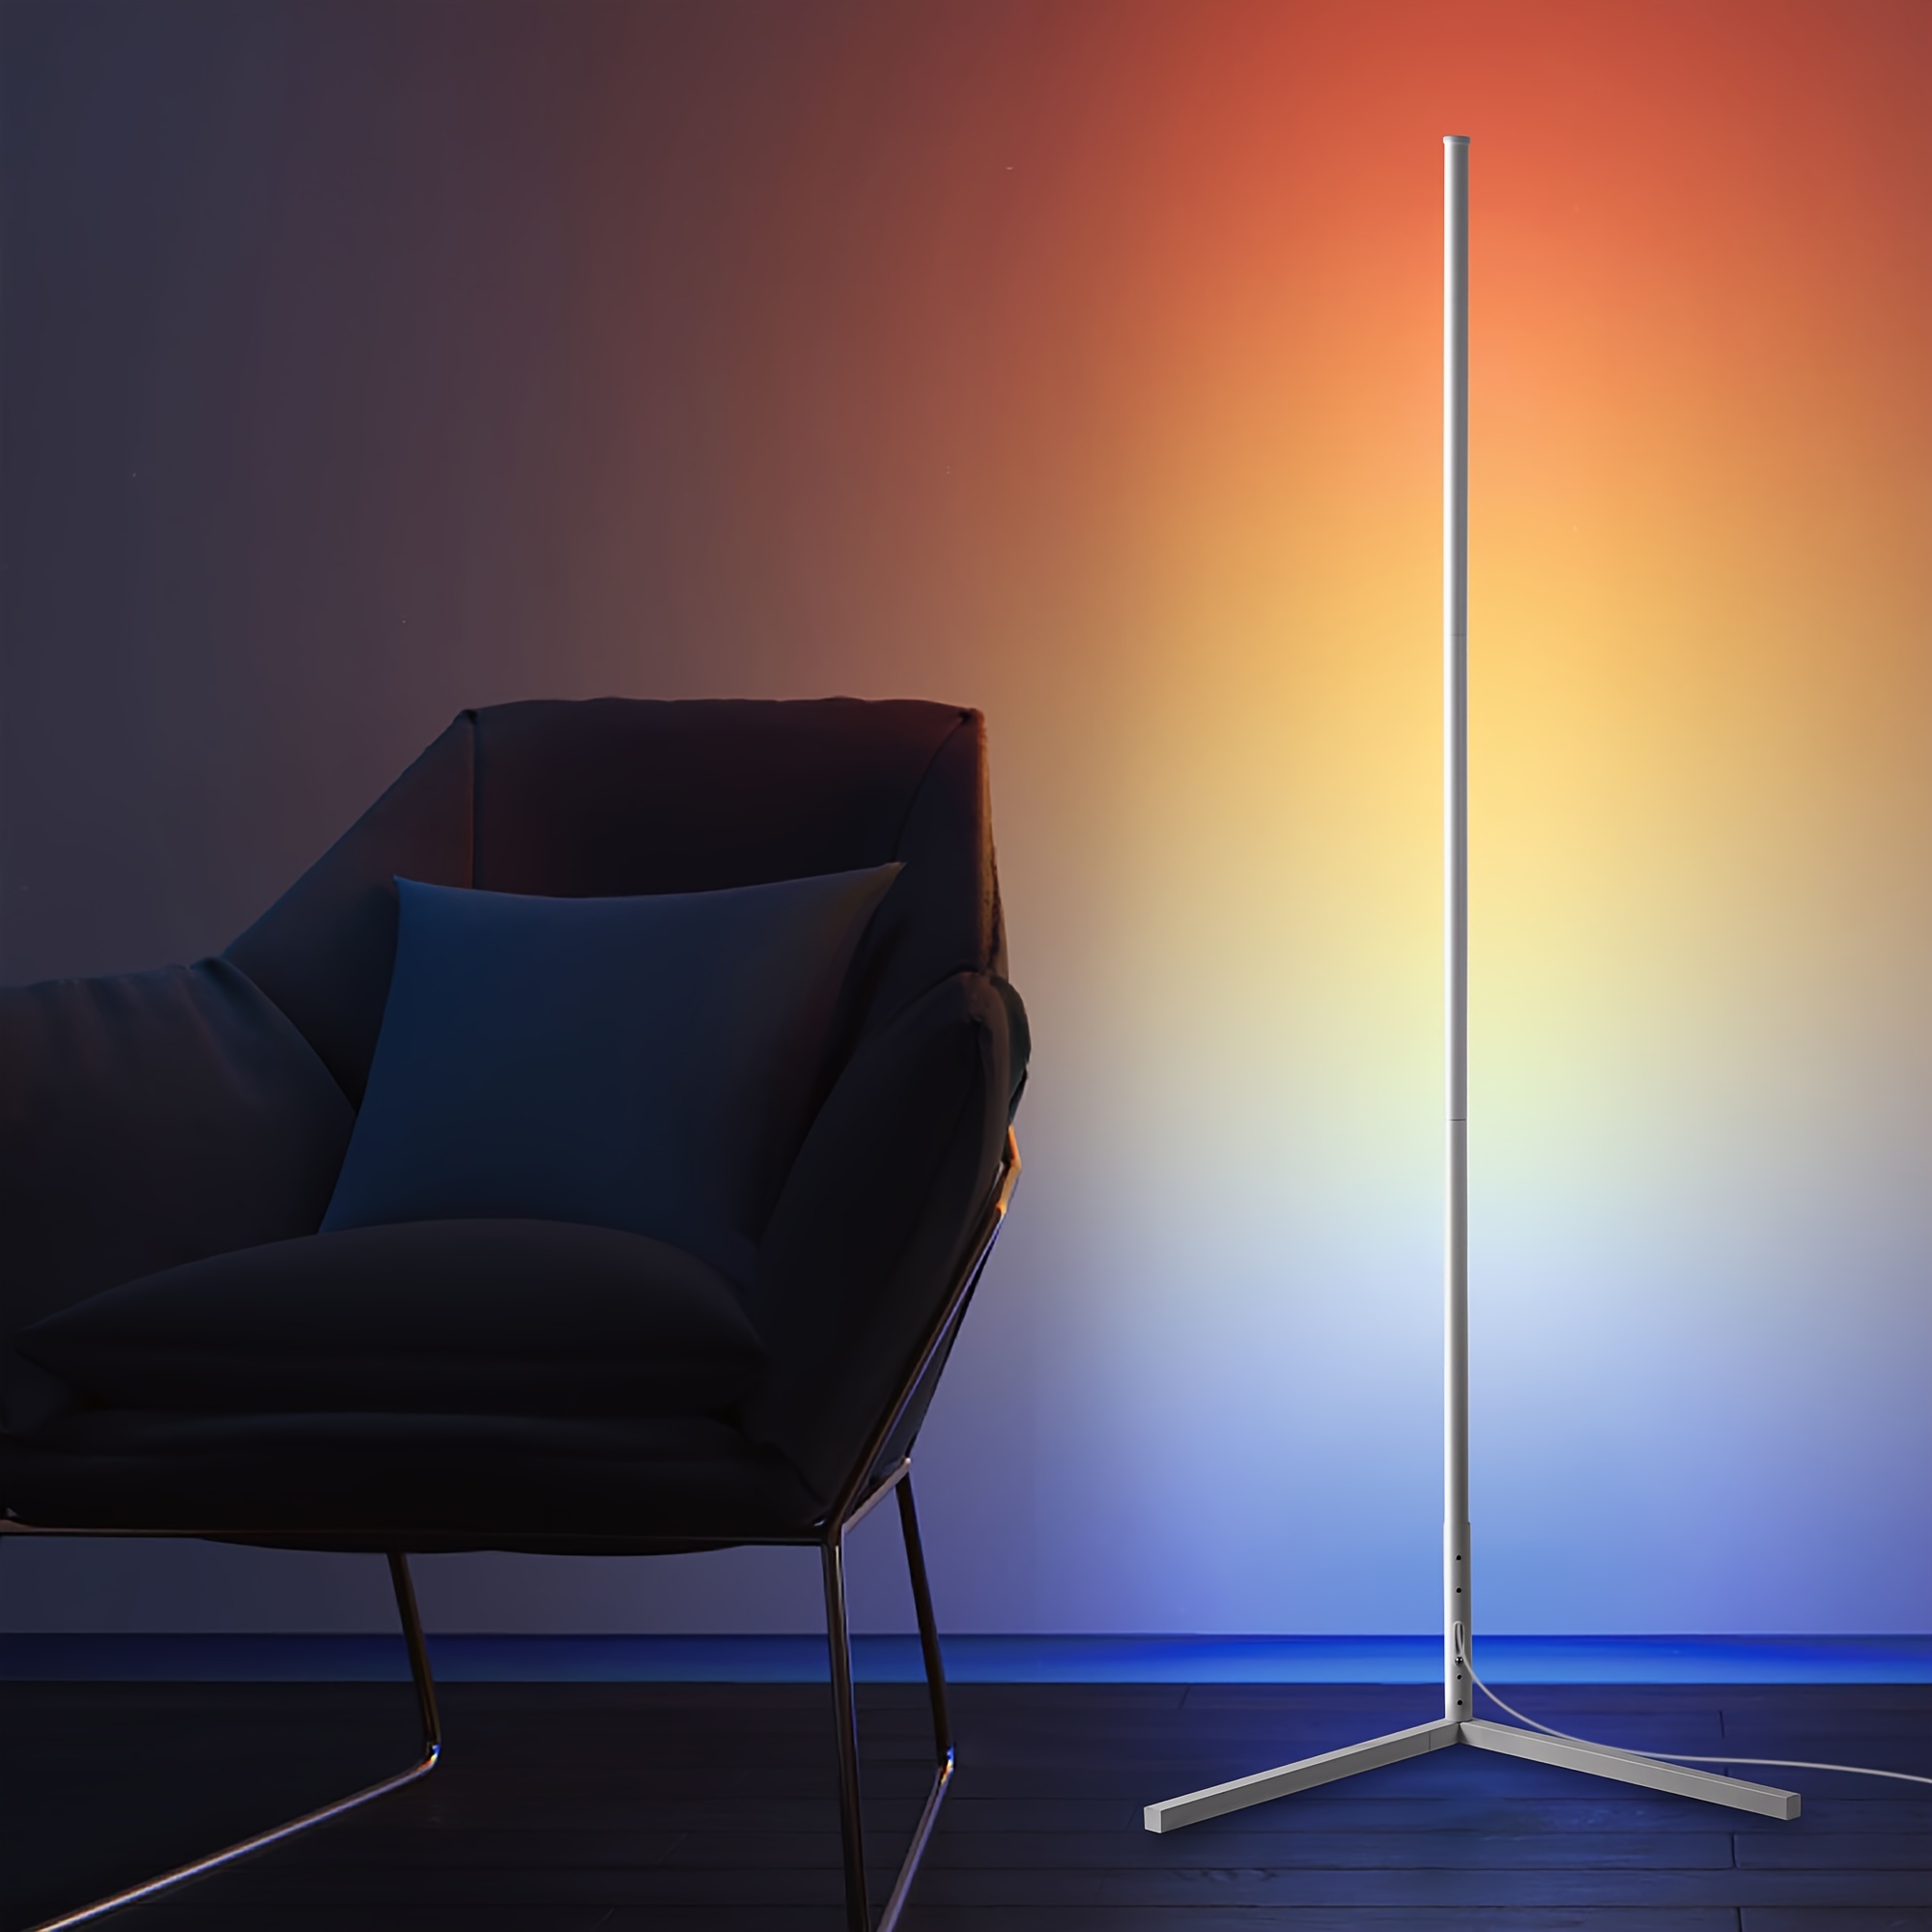 

1pc White Rgbcw Led Corner Floor Lamp, Minimalist Dimmable Mood Light, 57" Standing Tall Lamp For Living Room, Bedroom, Home Office, Party, 3000k-6000k Warm White Light, Rgb Dynamic Lights